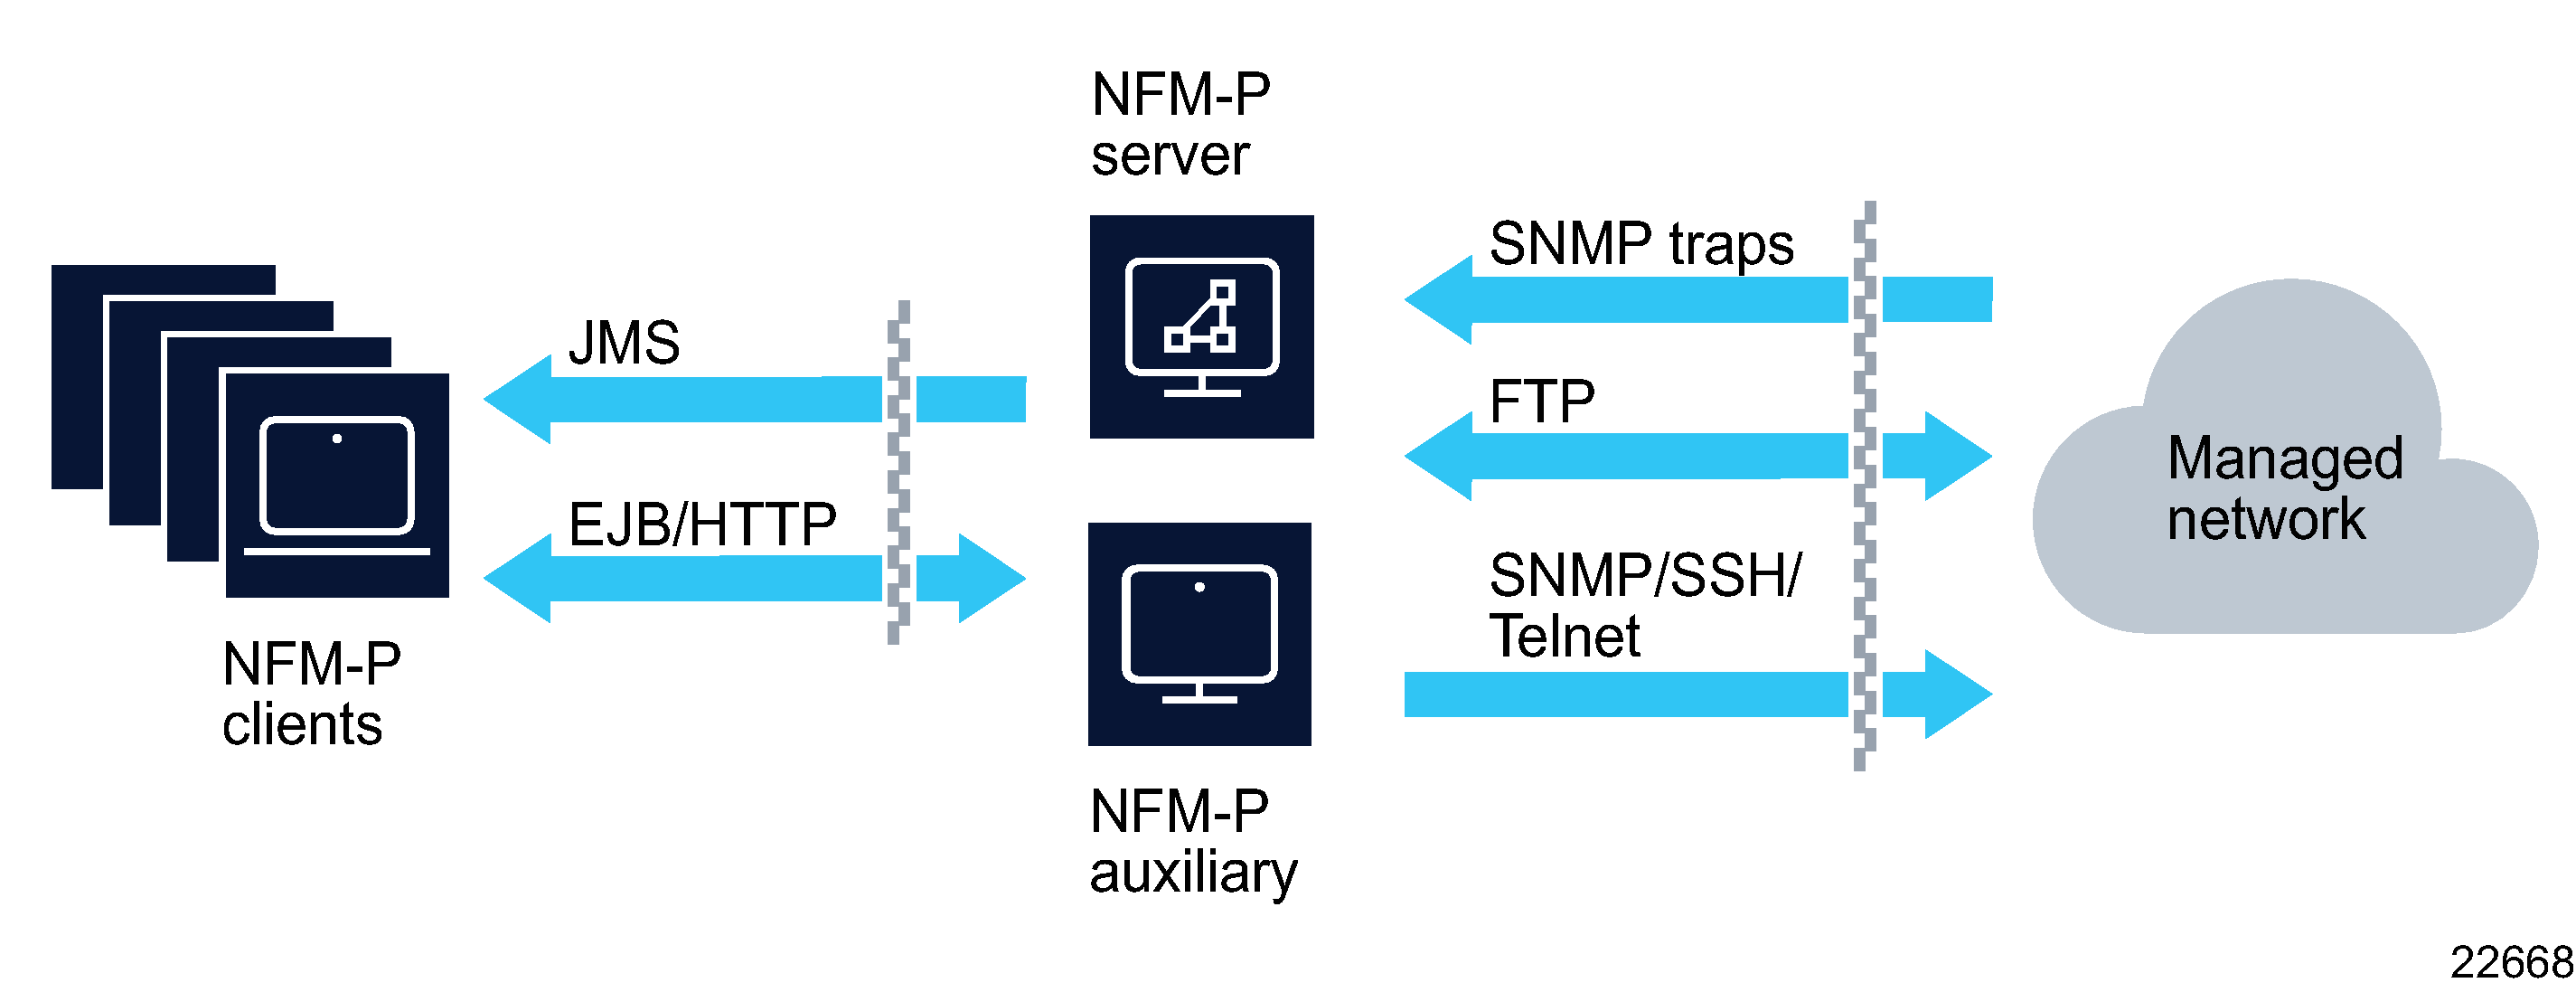 Firewalls and NFM-P standalone deployments